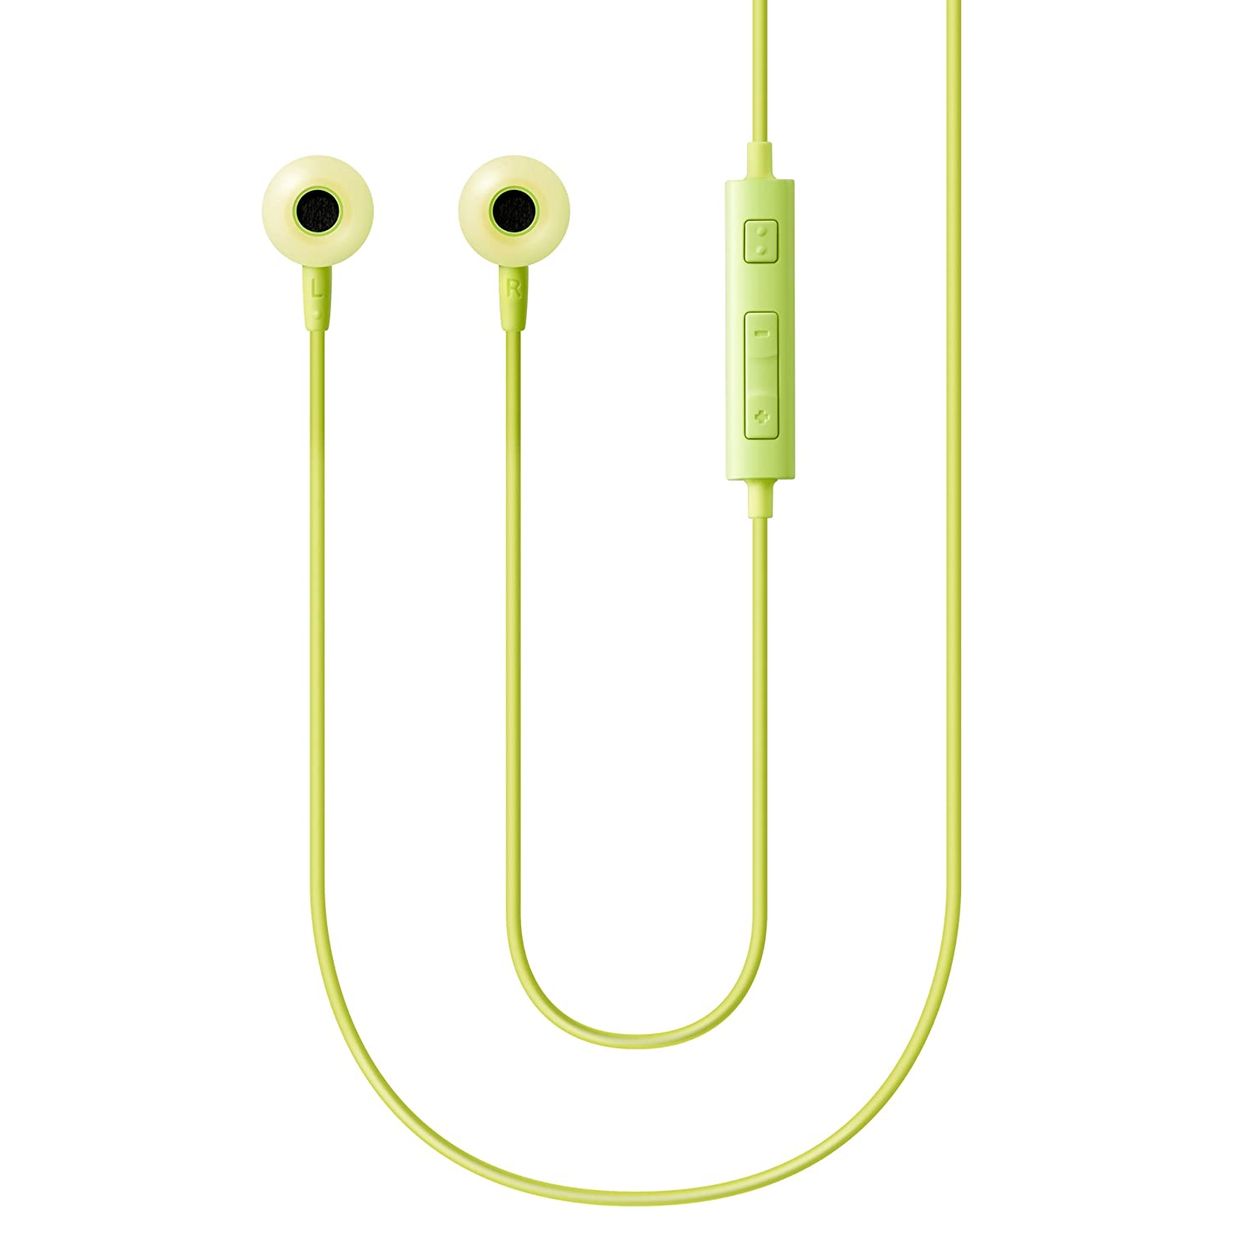 Open Box, Unused Samsung EO-HS130DGEGIN HS-1303 Wired in Ear Earphones with Mic Green Pack of 2